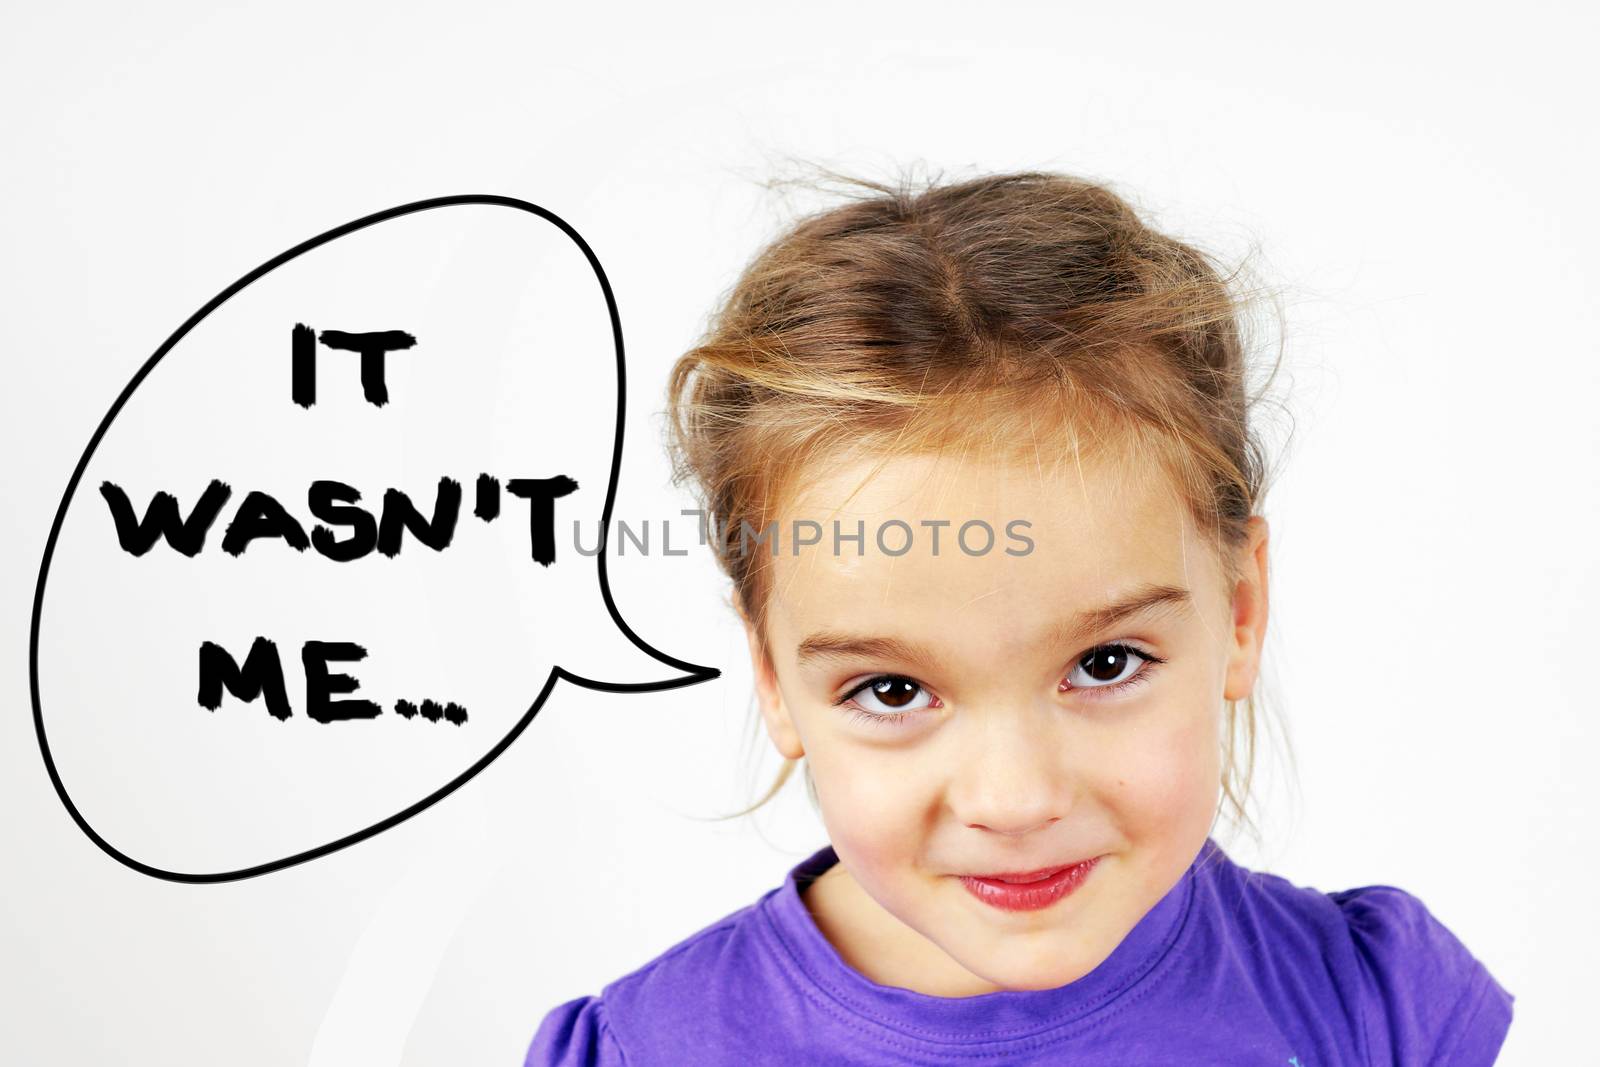 Little blond girl with mishievous face and It wasn't me text in speech bubble